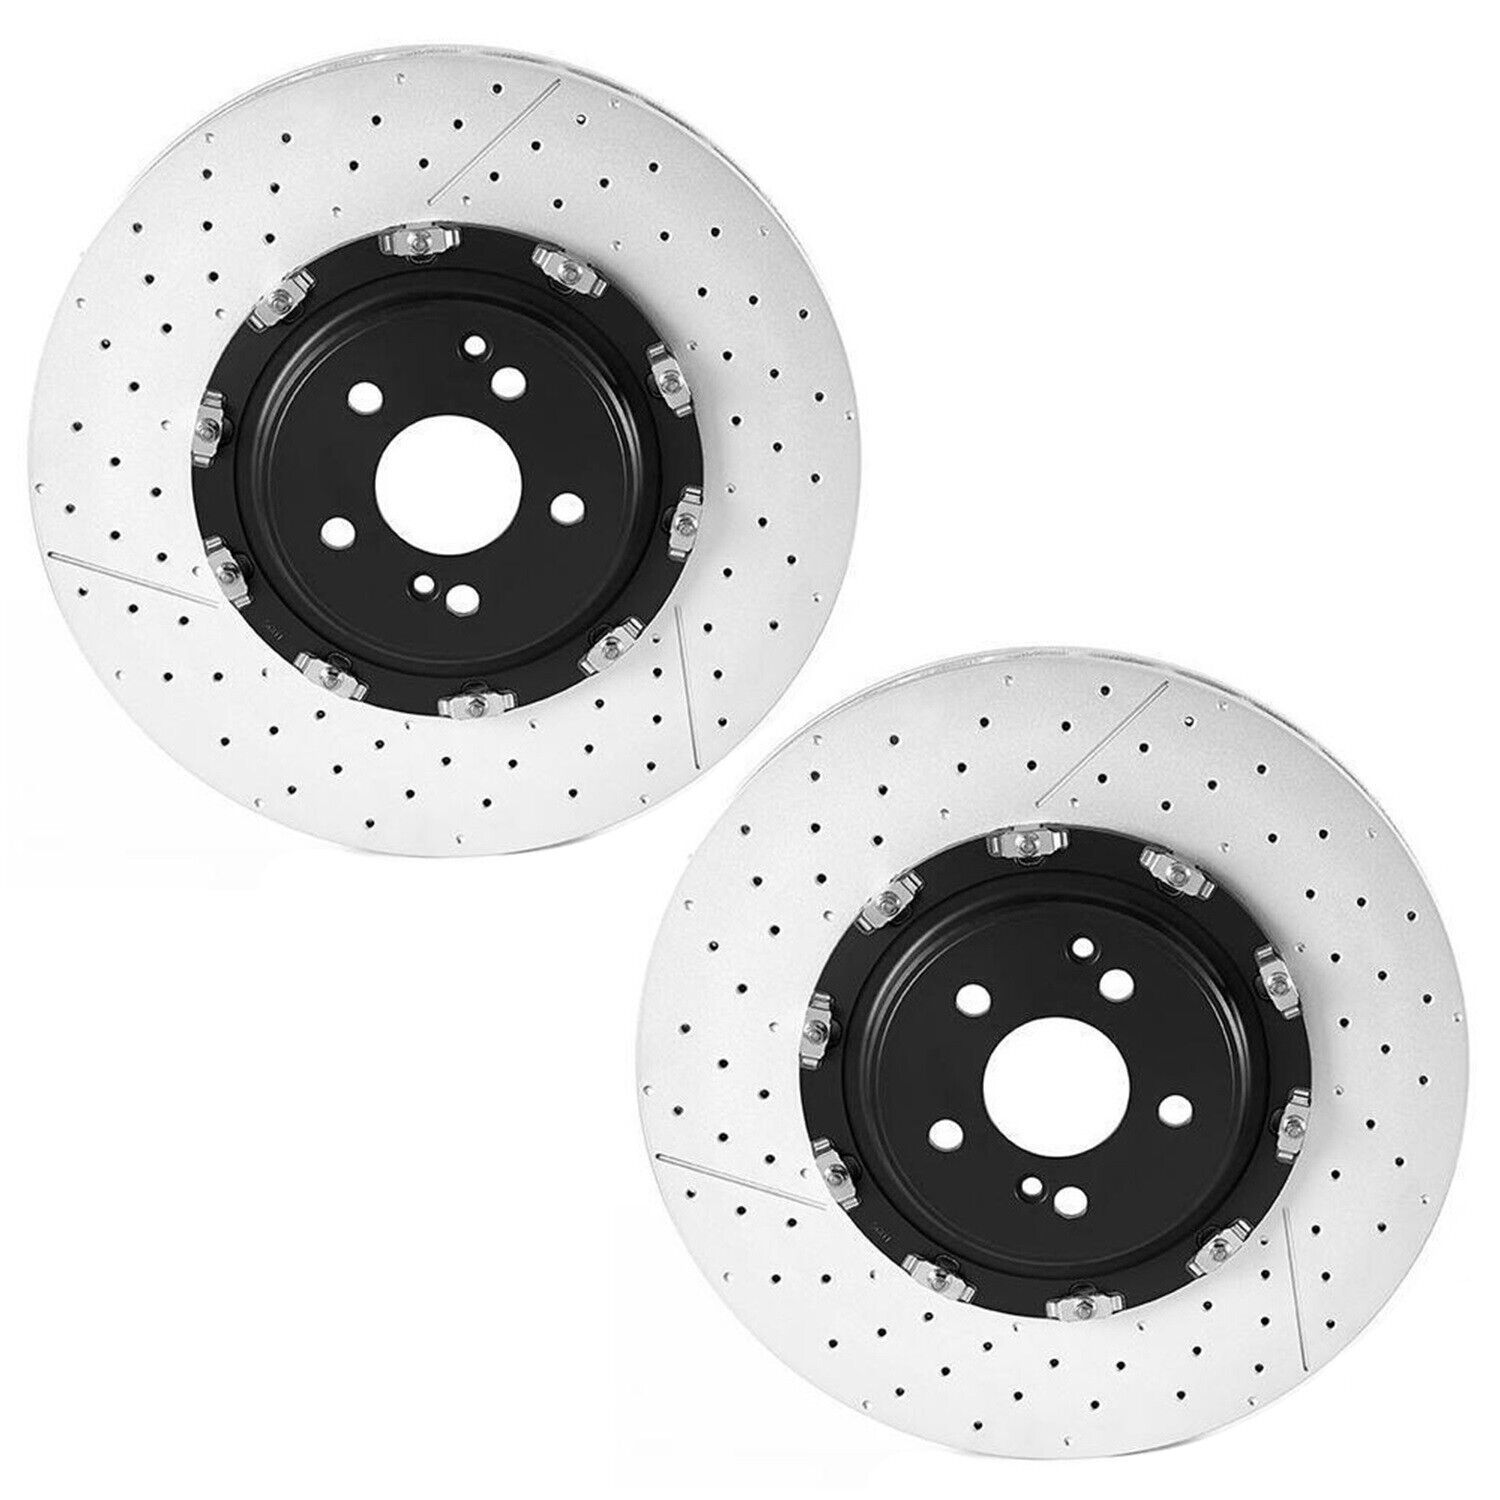 Brembo Set 2 Front Drilled Slotted Disc Brake Rotors For MB C190 C204 W219 C197